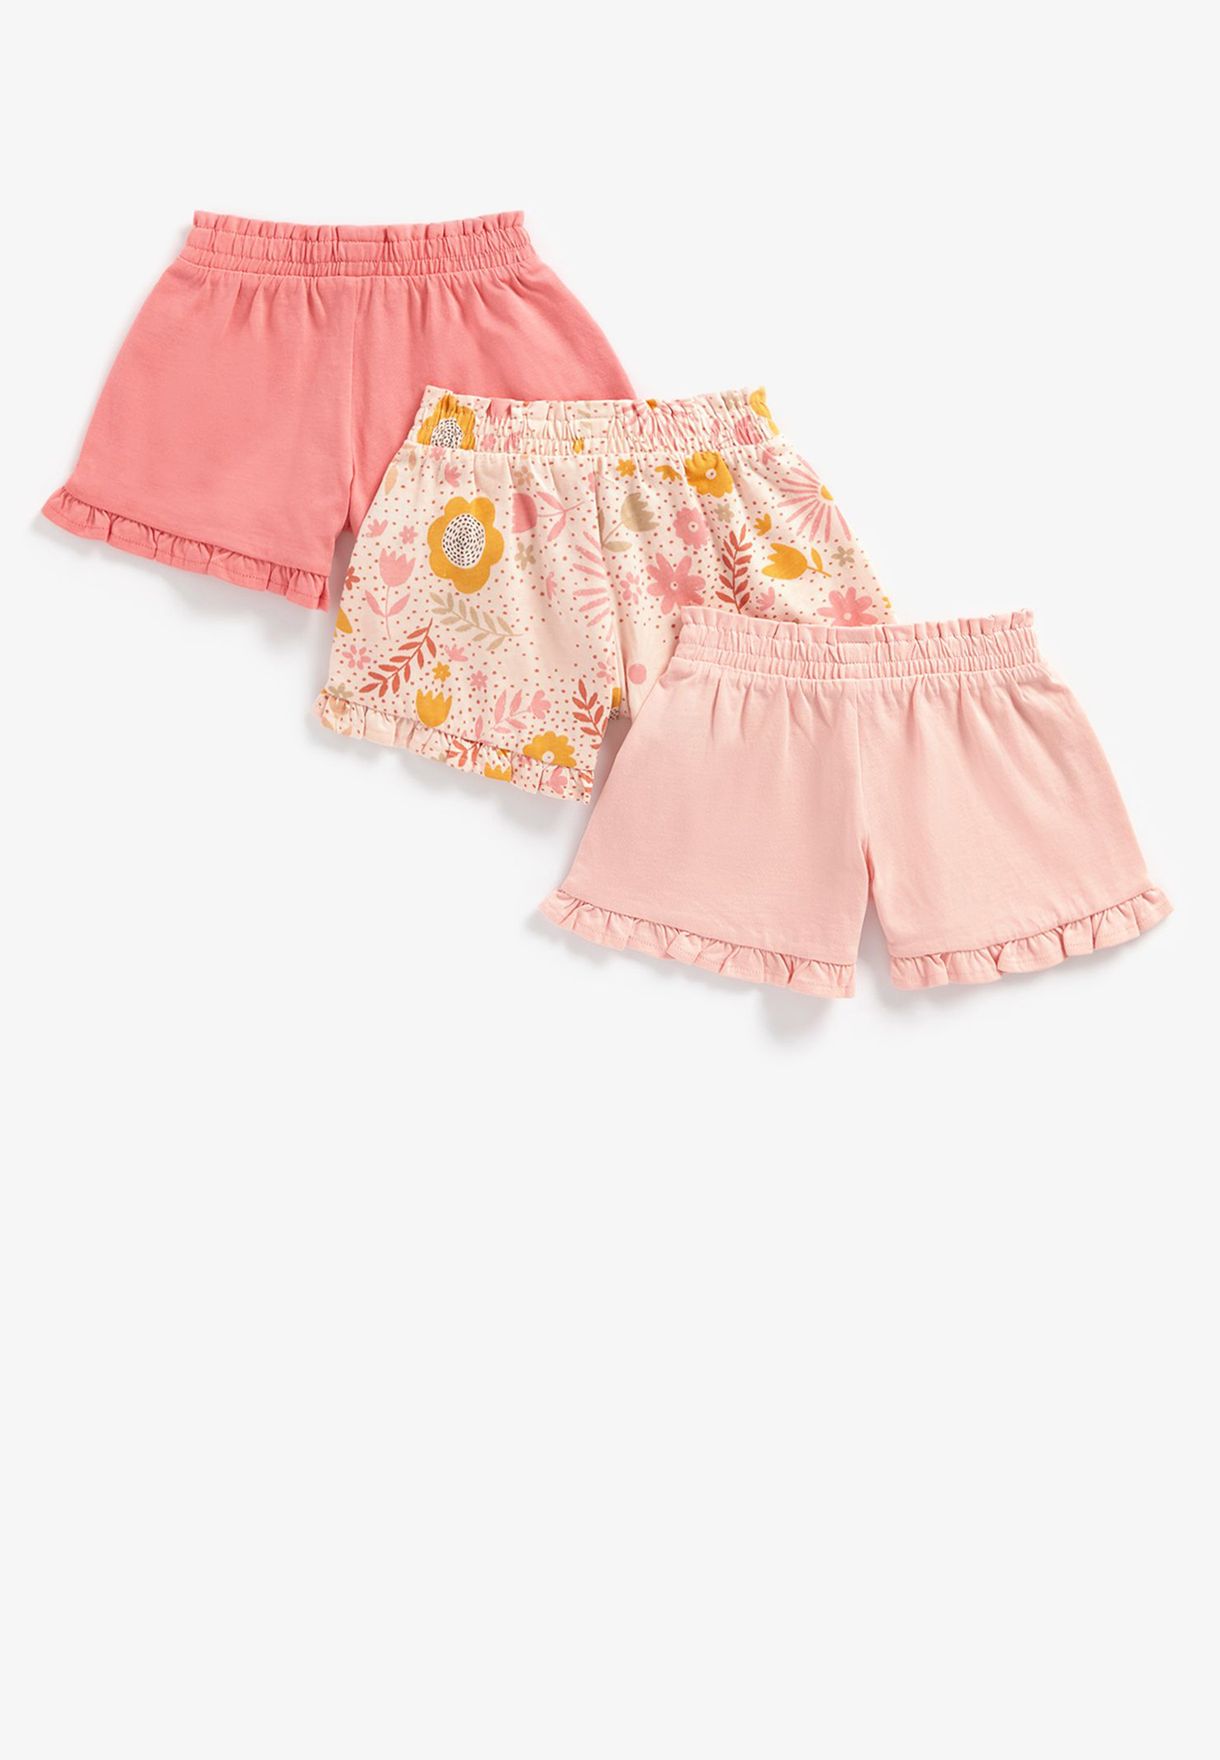 Kids 3 Pack Assorted Shorts